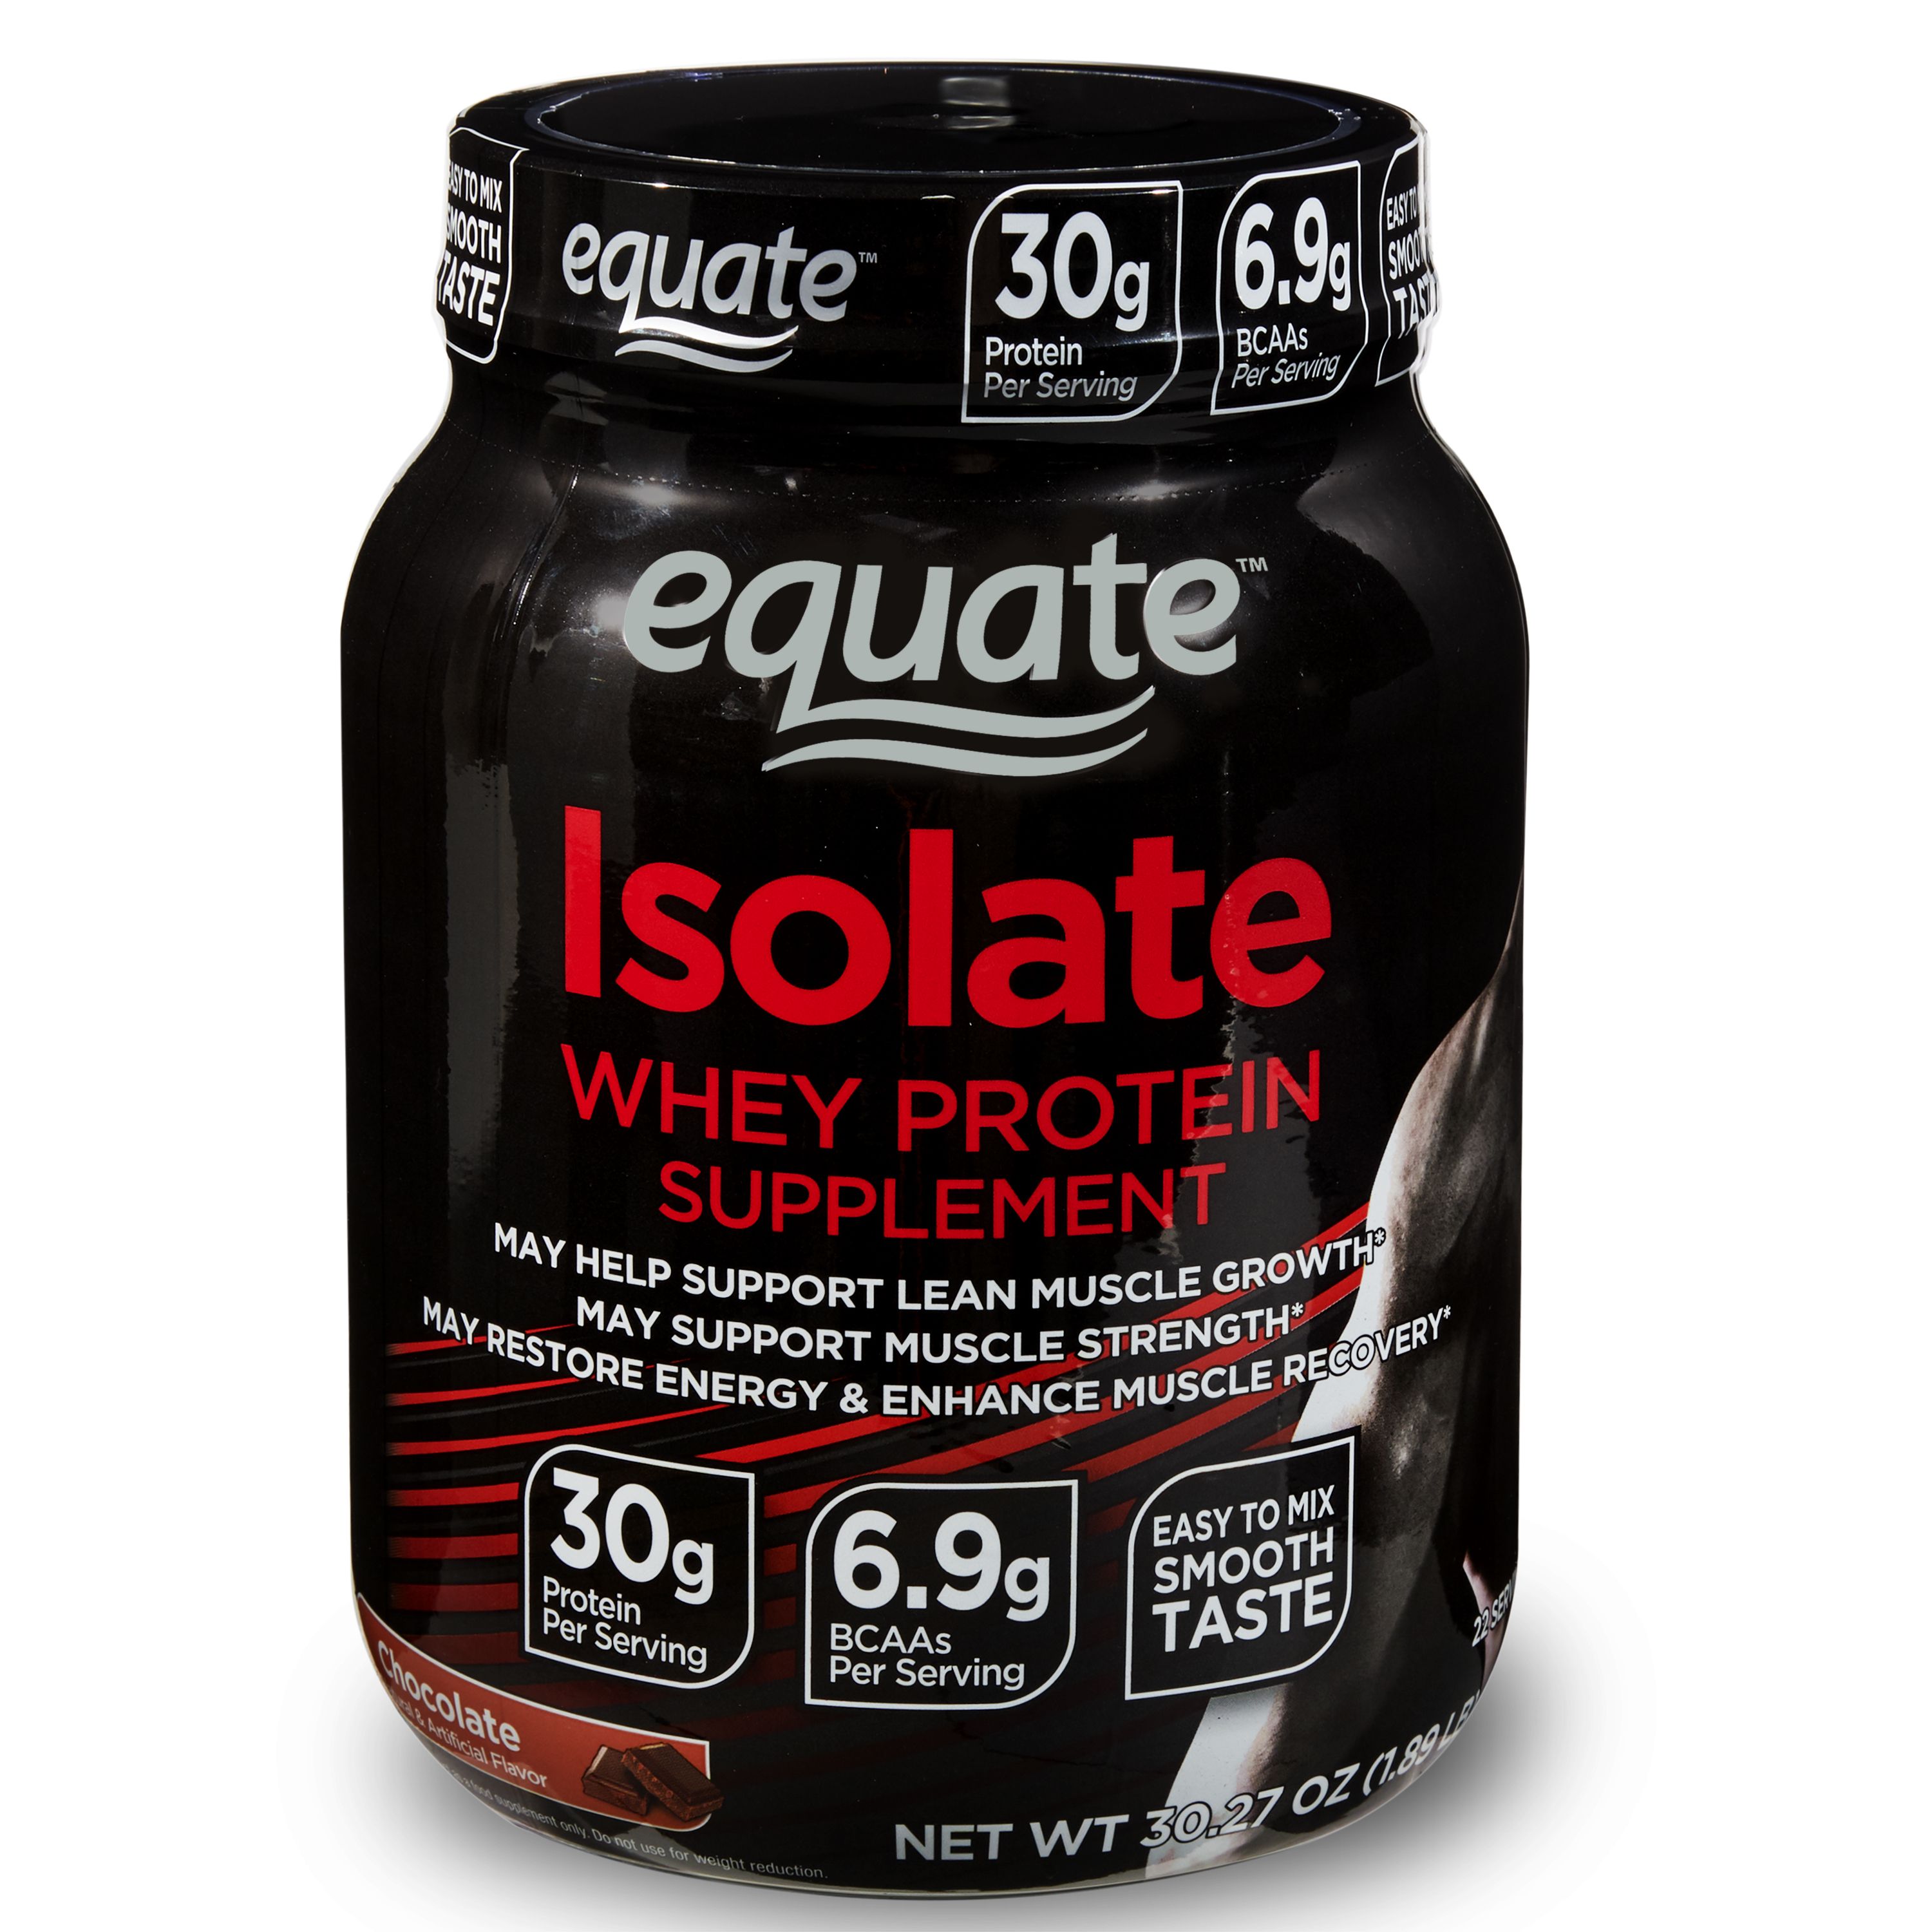 Equate Whey Protein Isolate ﻿